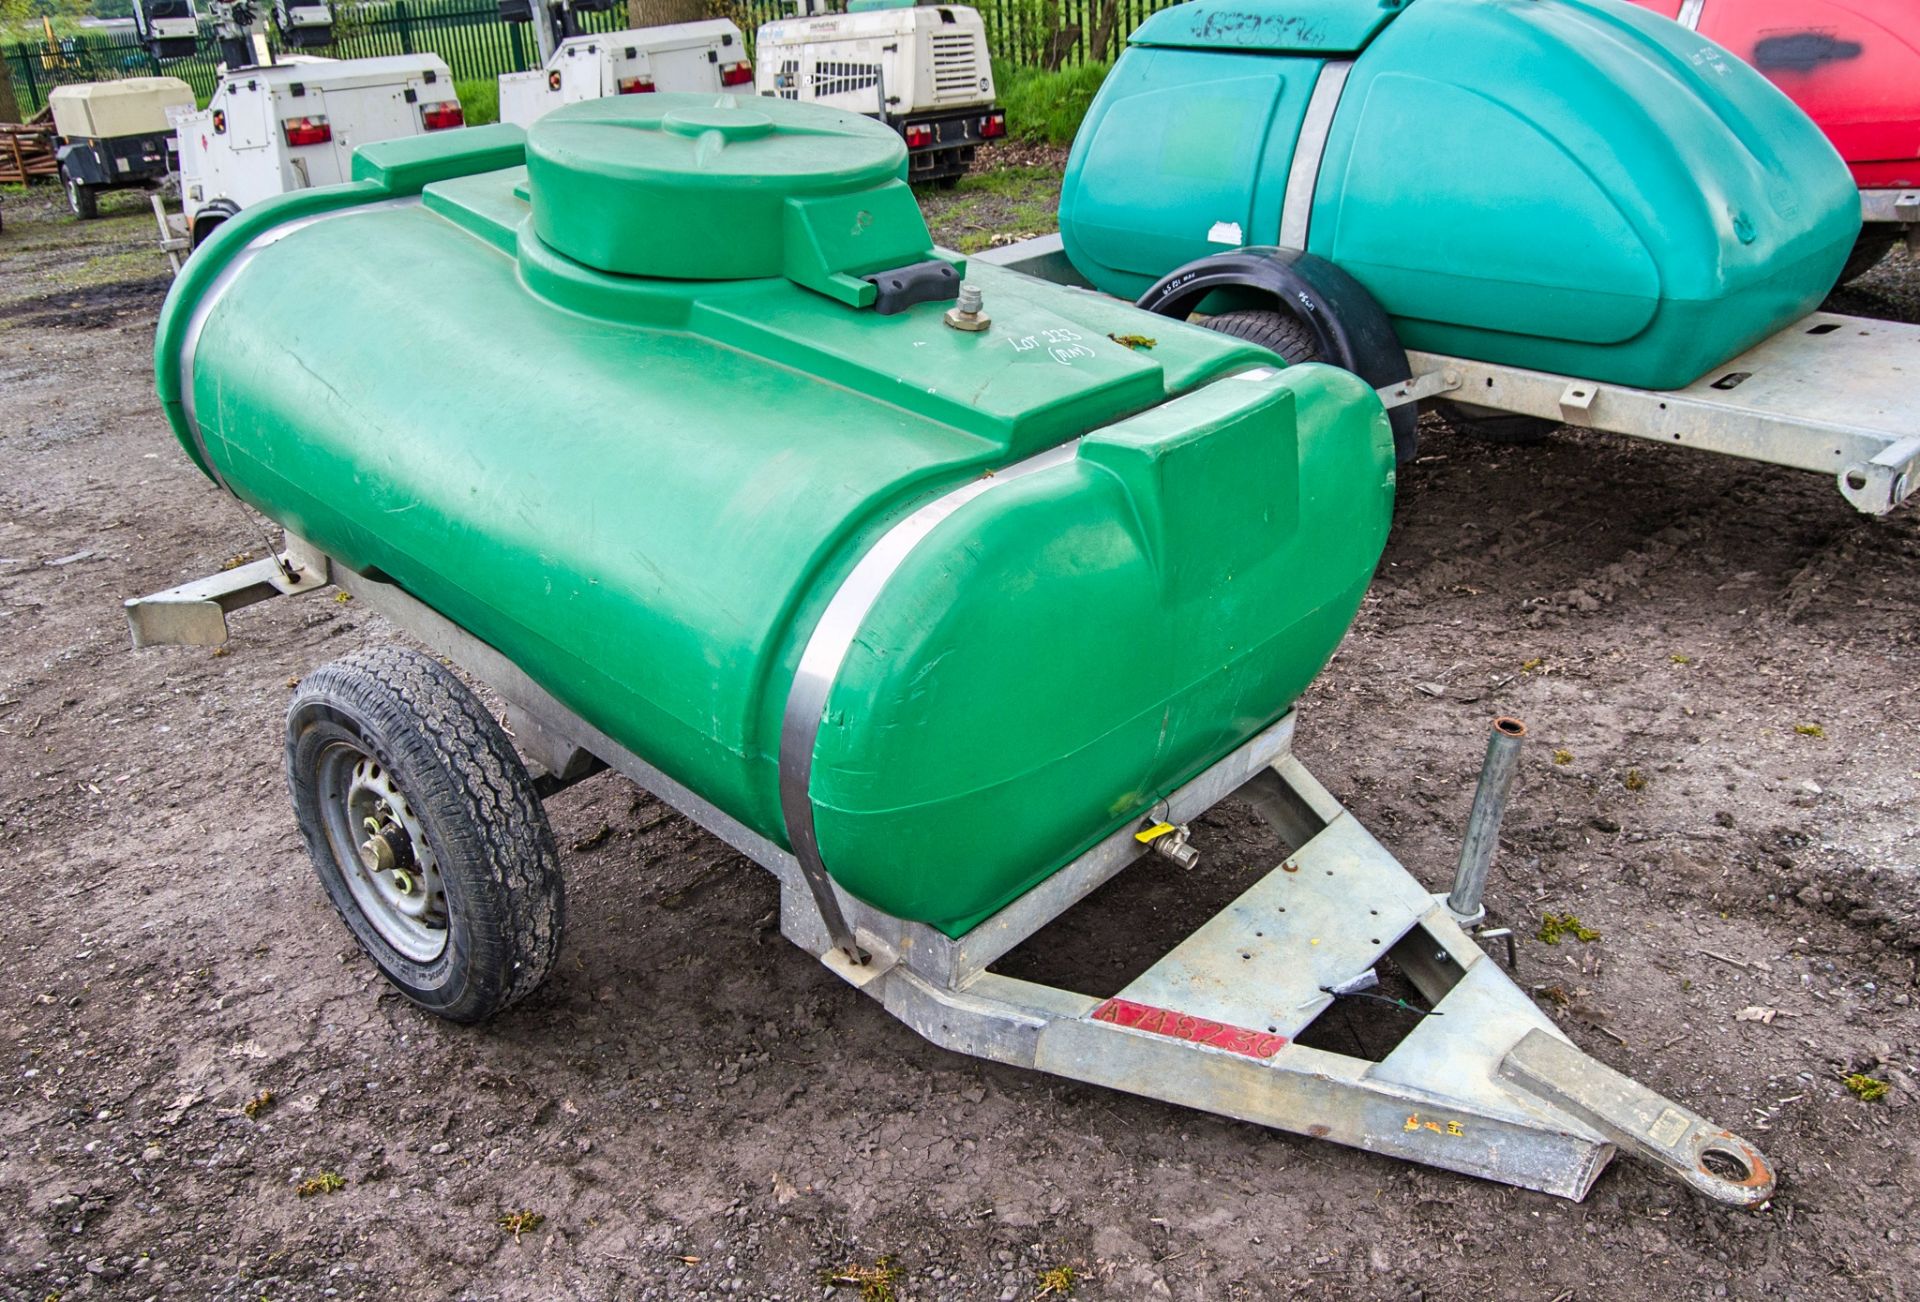 Trailer Engineering 1000 litre site tow mobile water bowser A748236 - Bild 2 aus 6